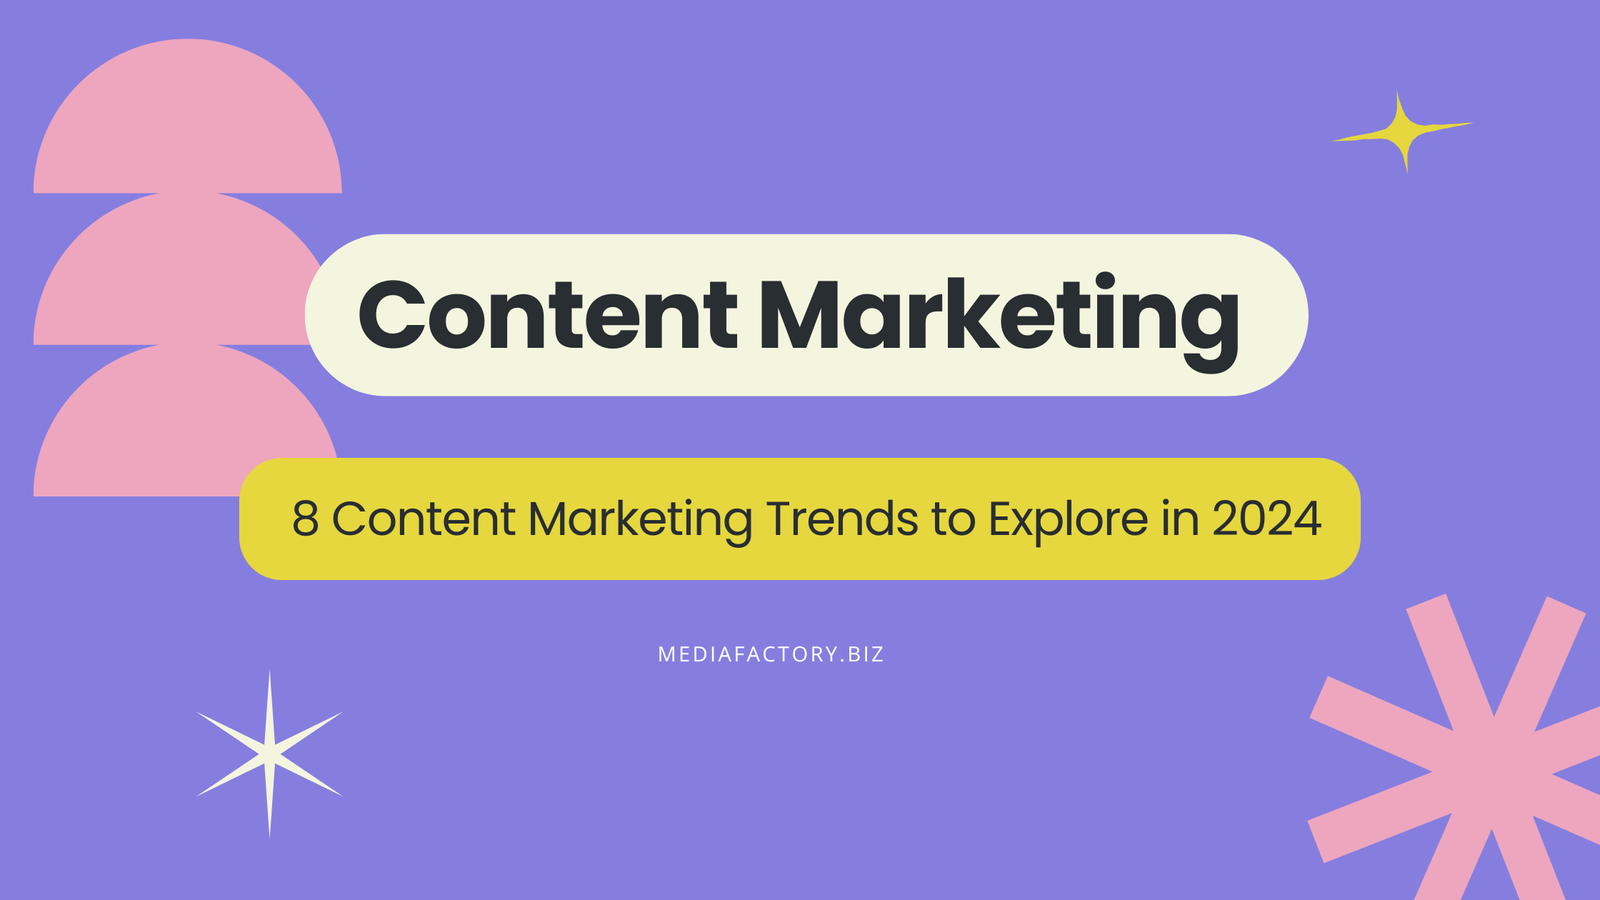 8 Content Marketing Trends to Explore in 2024